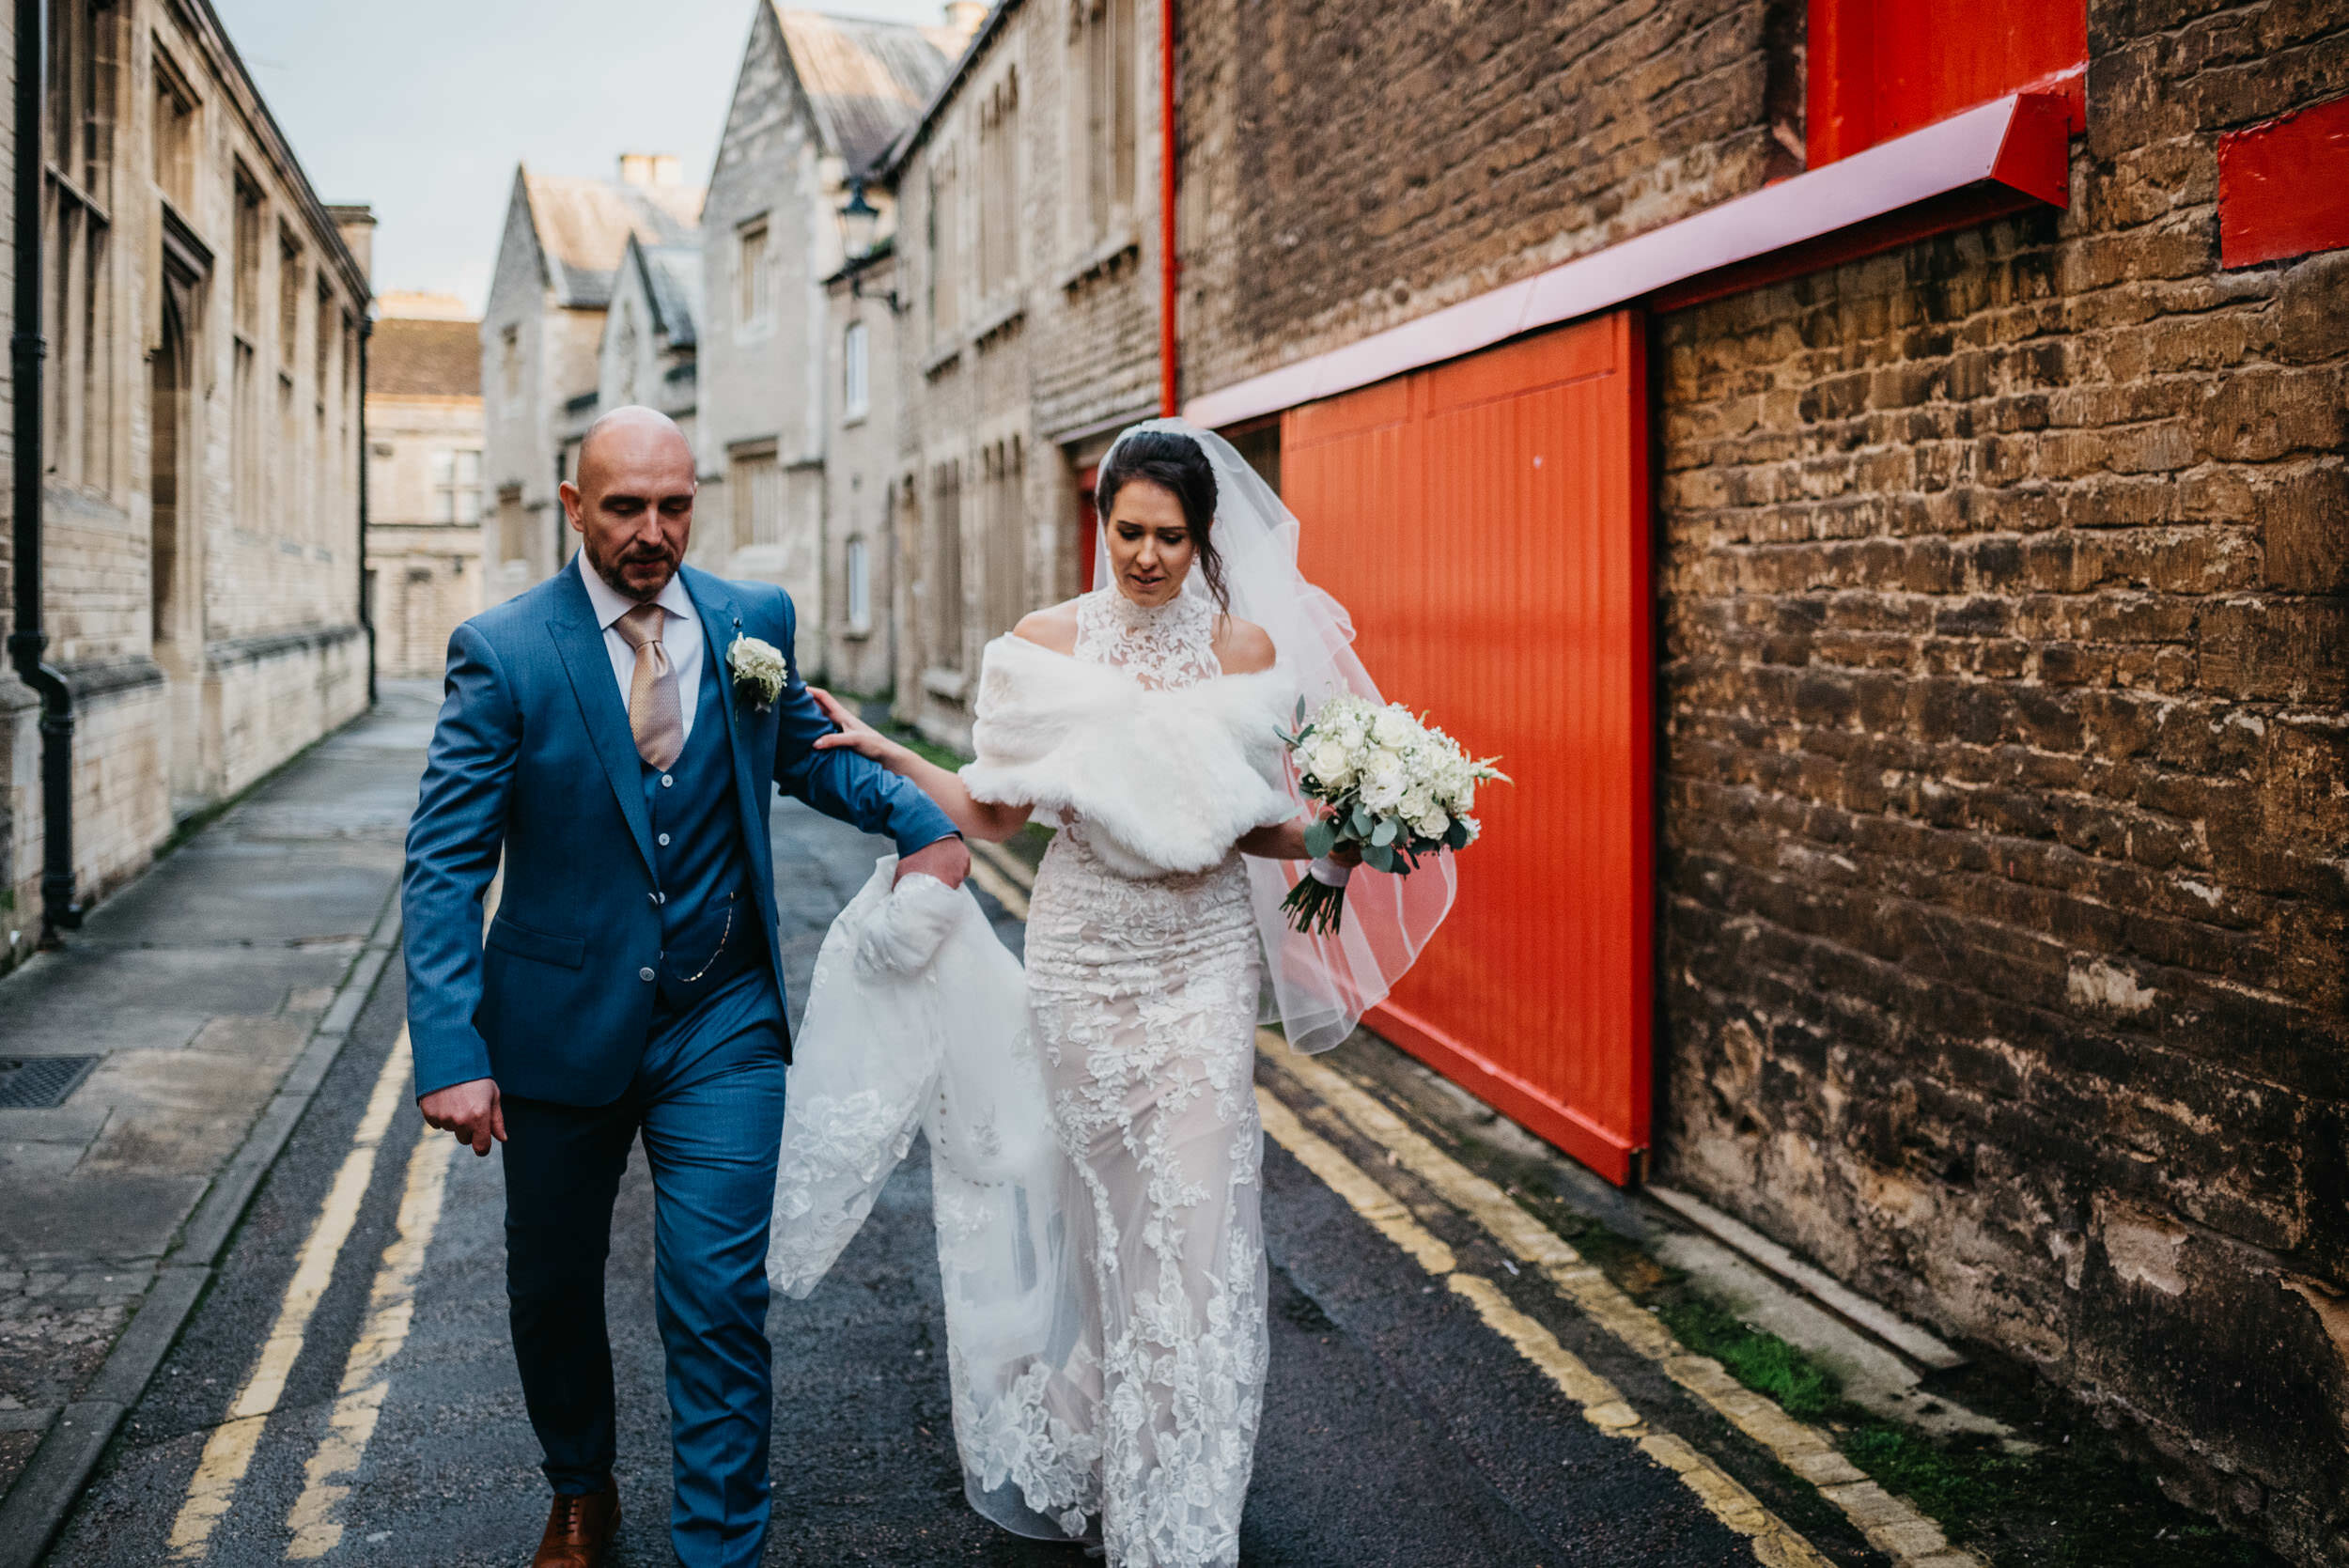 Bride and groom walking through the streets of Oundle